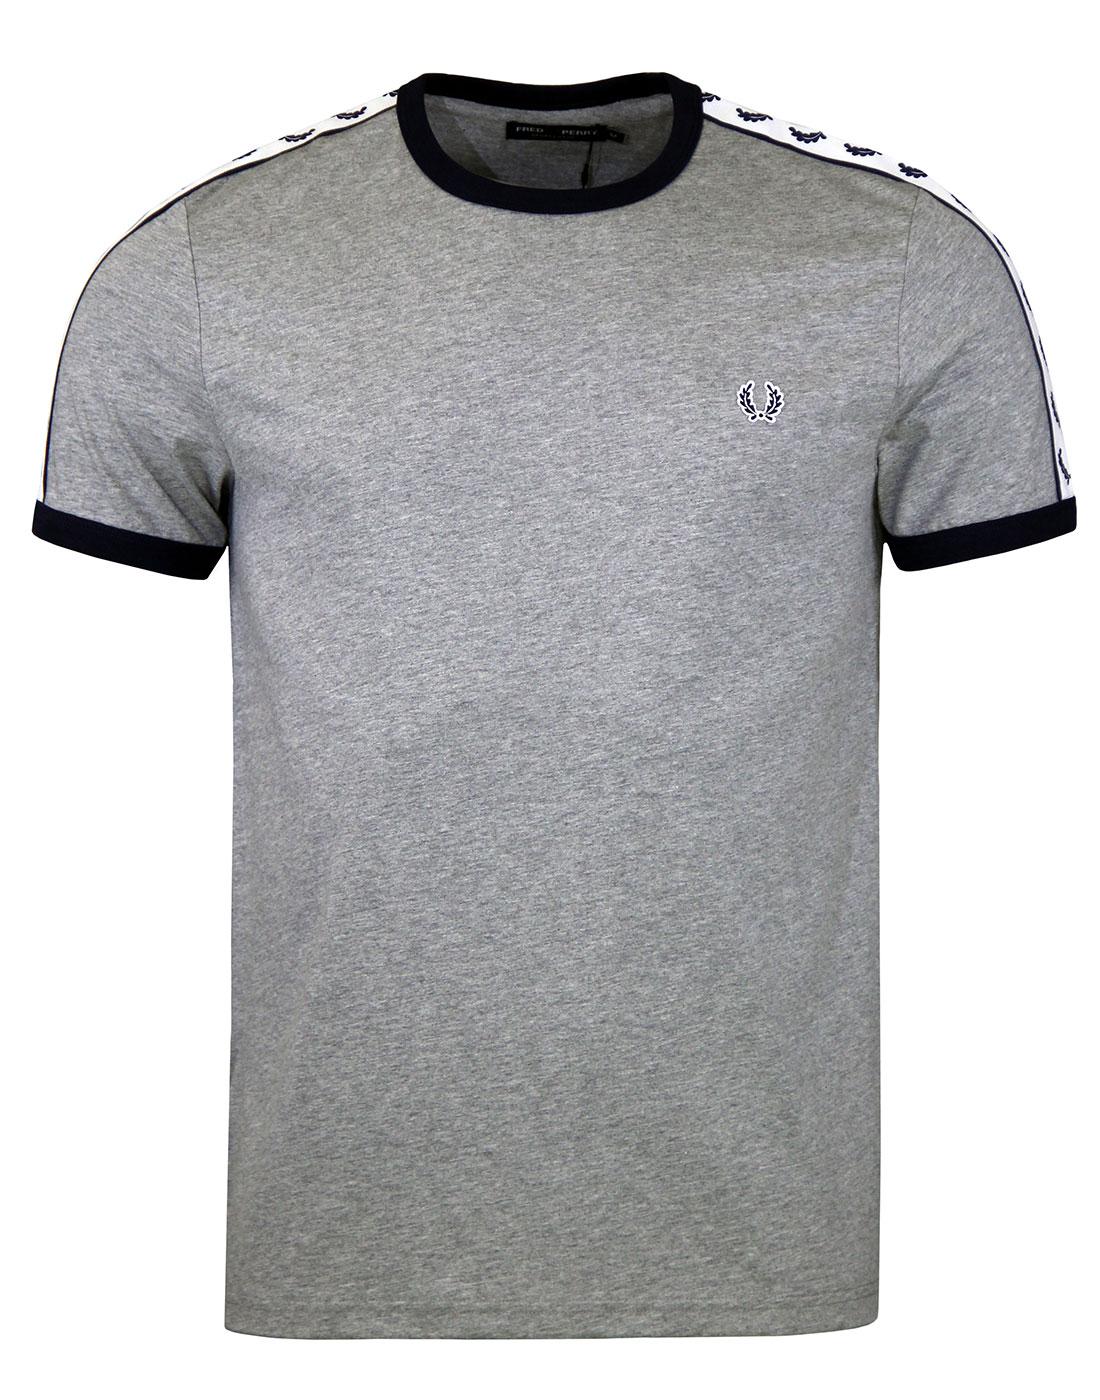 FRED PERRY Men's Retro Taped Sleeve Ringer T-Shirt